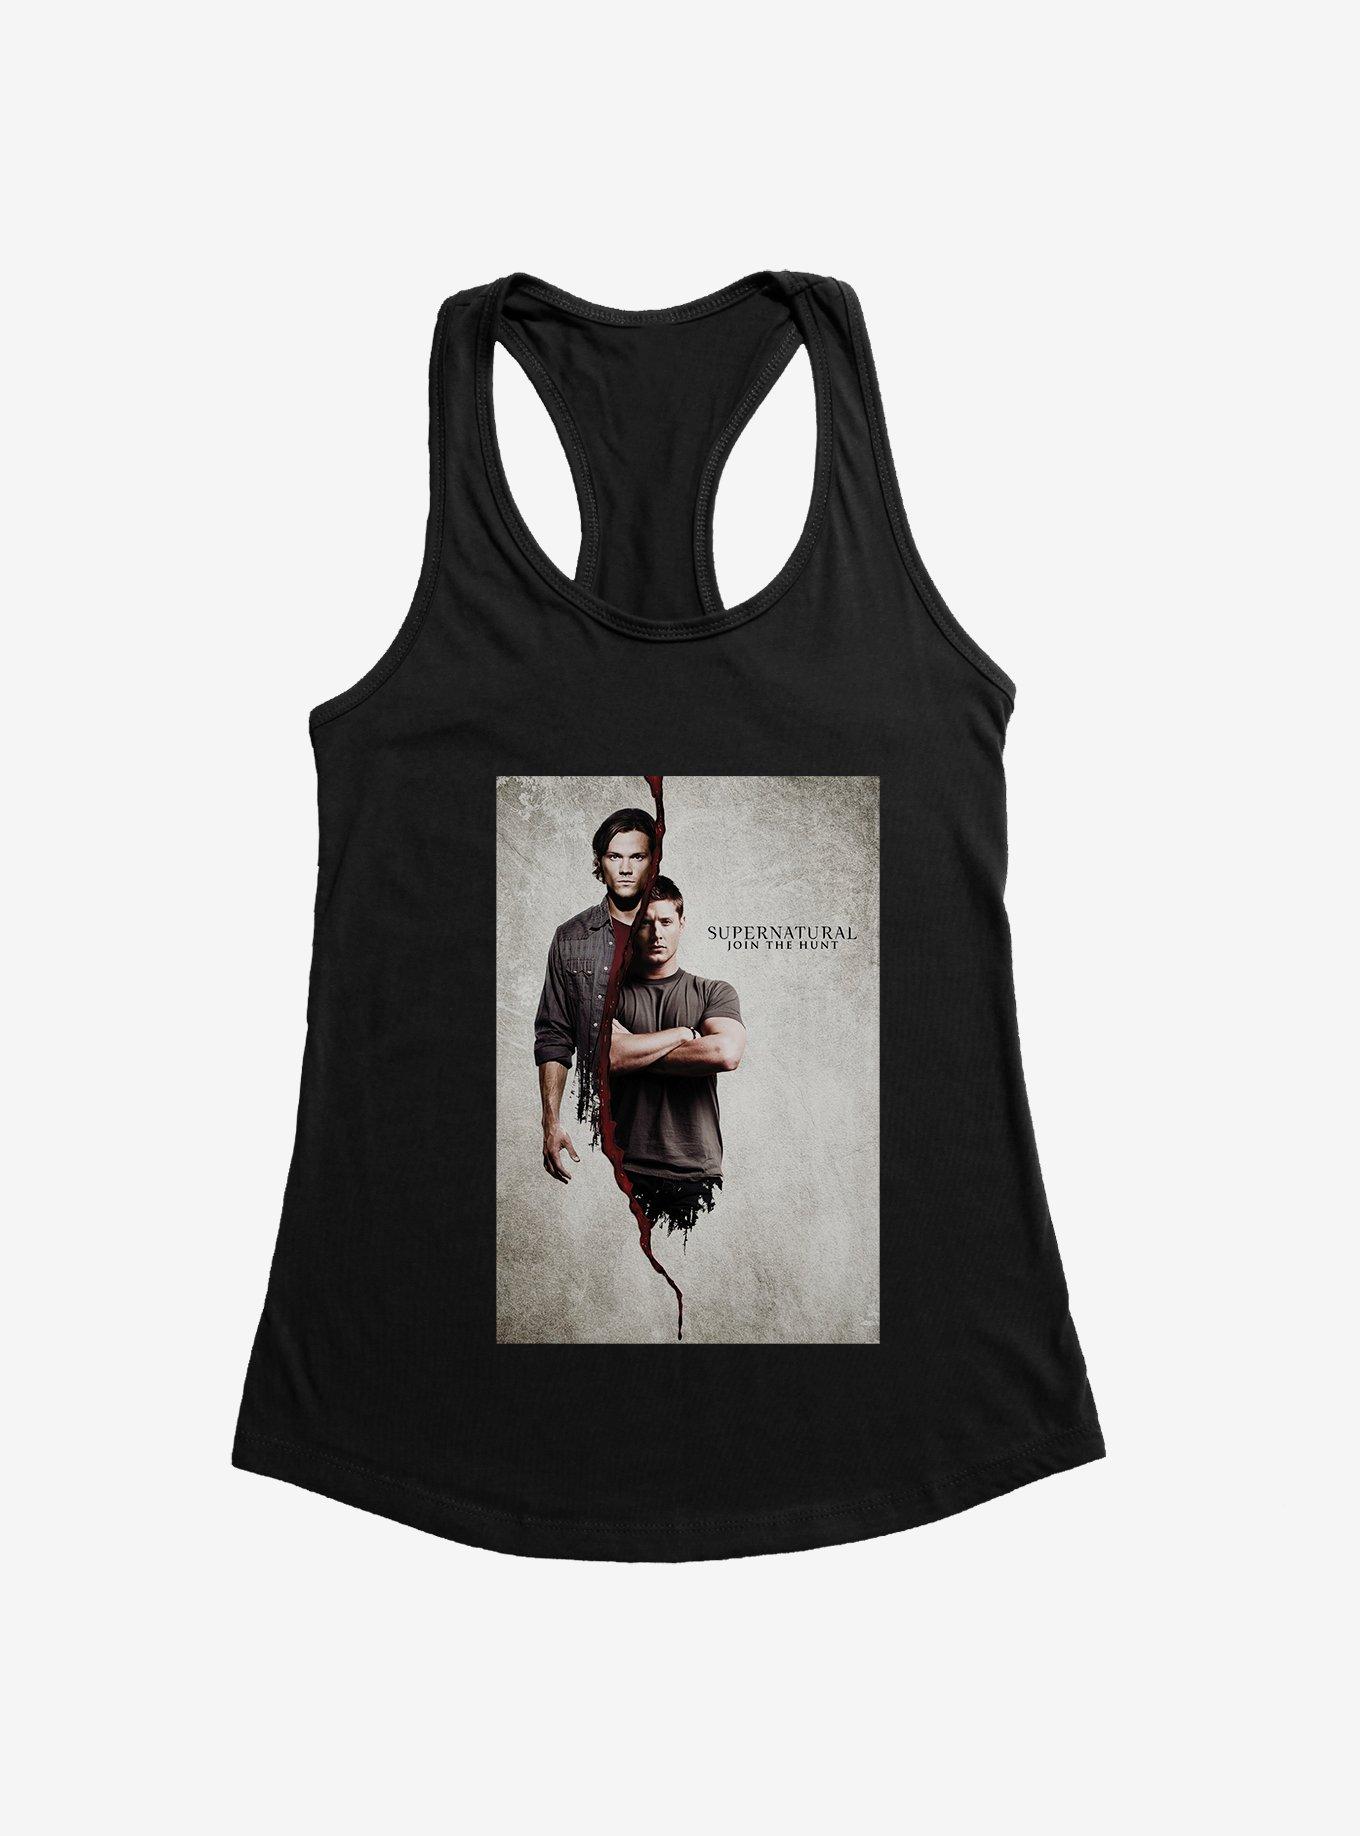 Supernatural Join The Winchester Brothers Girls Tank, BLACK, hi-res